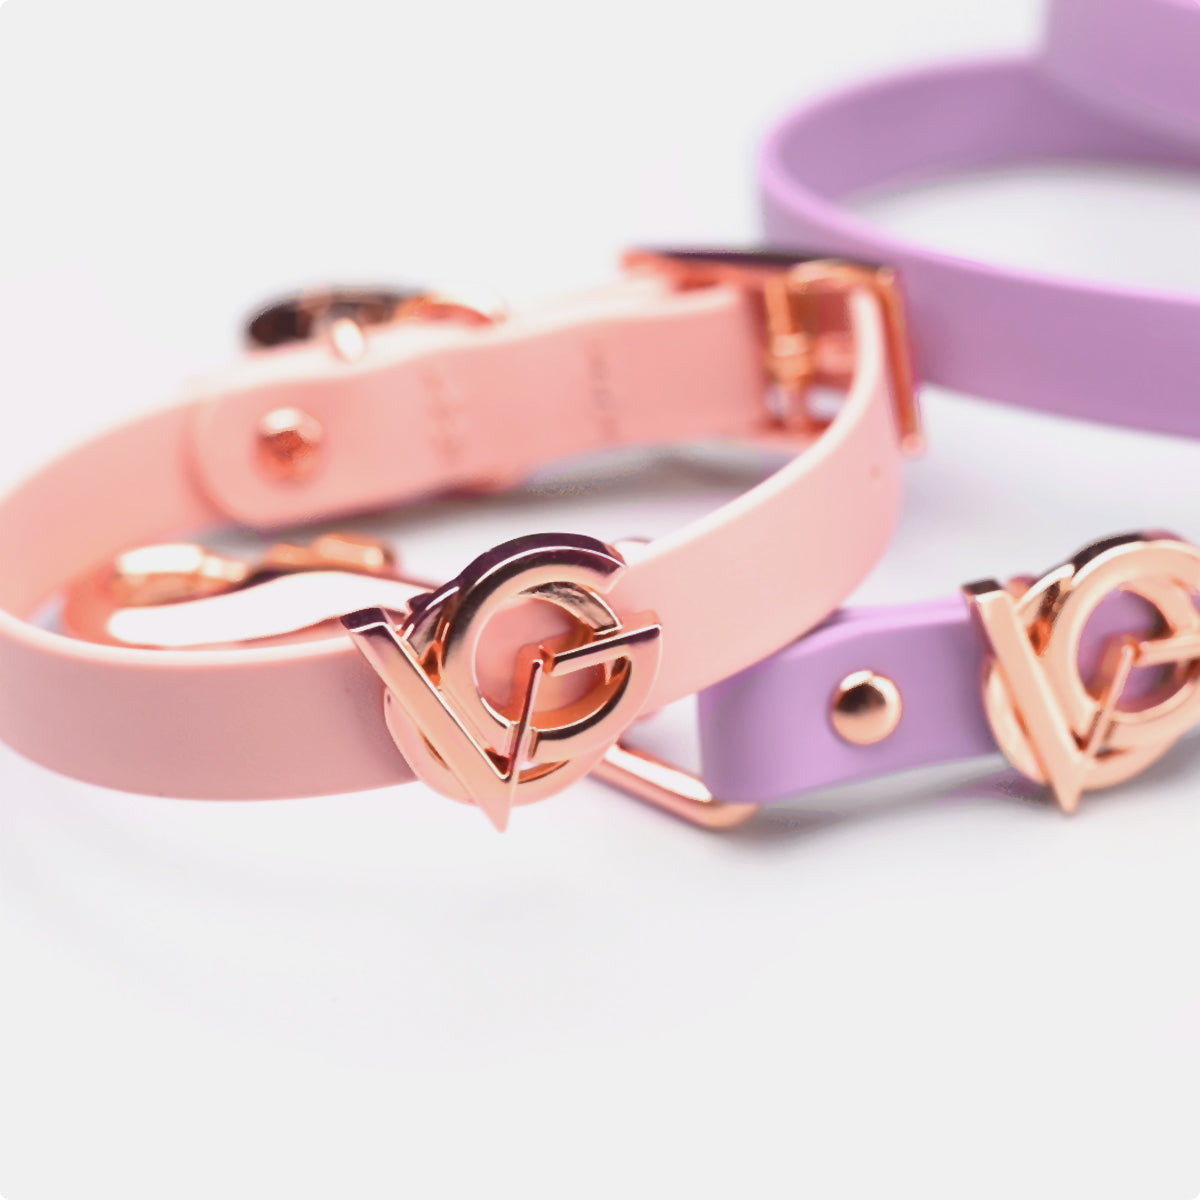 ACE Designer Dog Collar and Lead set in Rose Gold by ™ in British Dog  Collar Collection, Designer Dog Collars and Leads